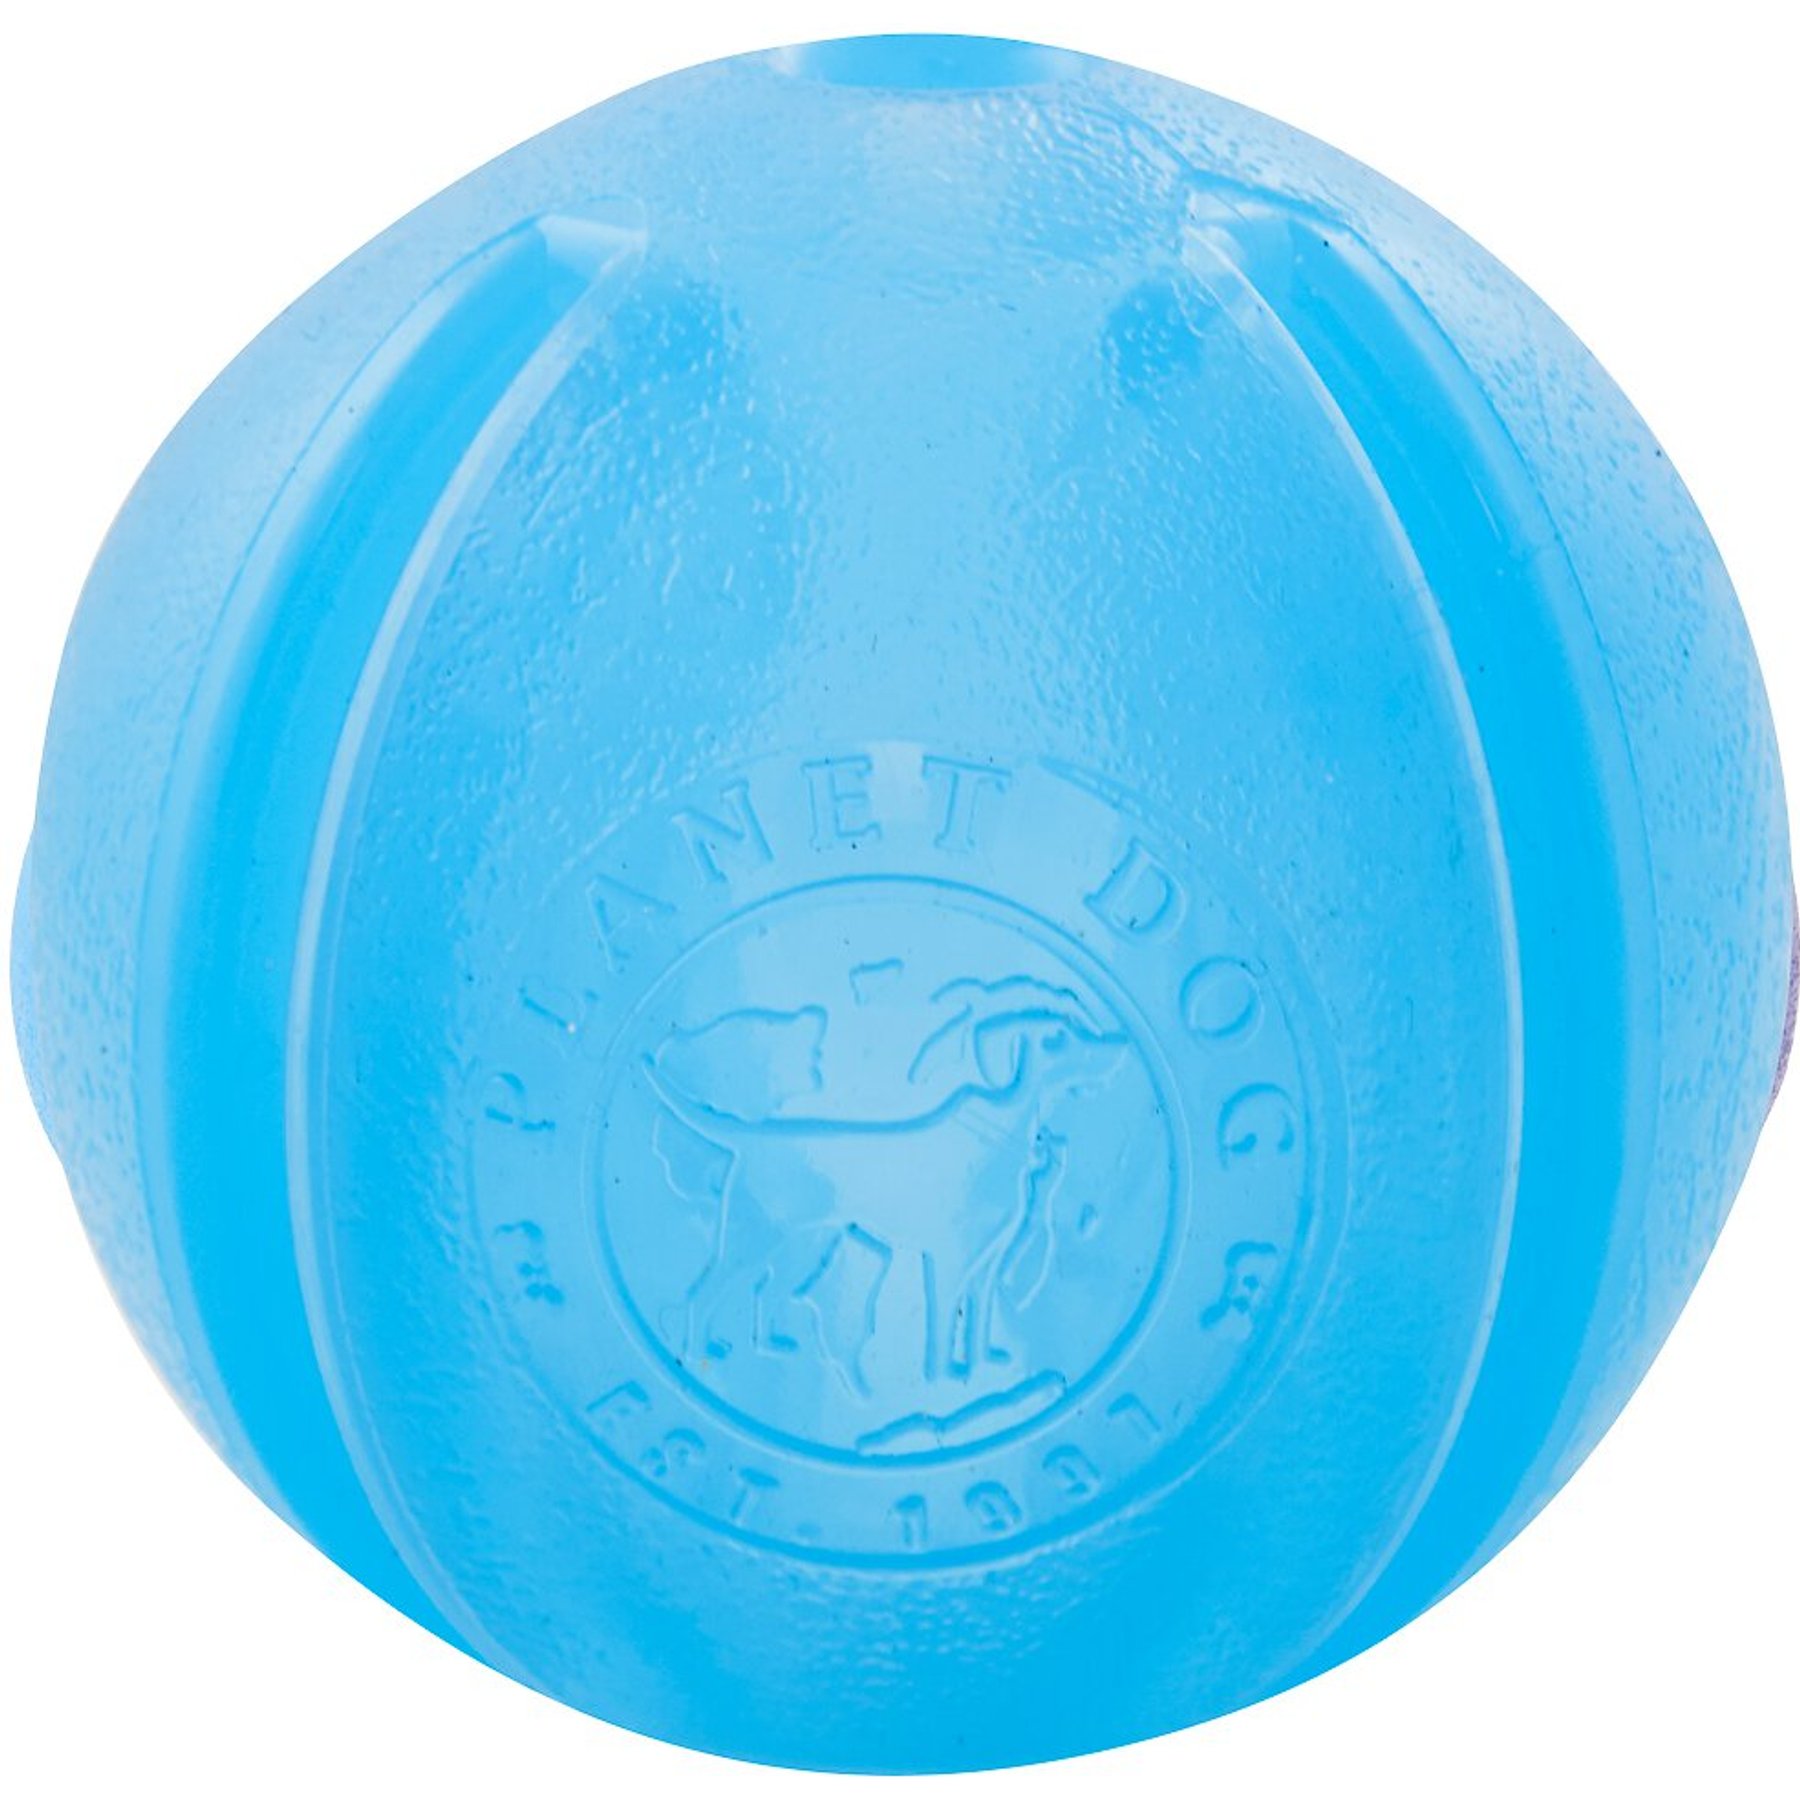 Planet Dog Orbee-Tuff Snoop Interactive Treat Dispensing Dog Toy, Large,  Blue